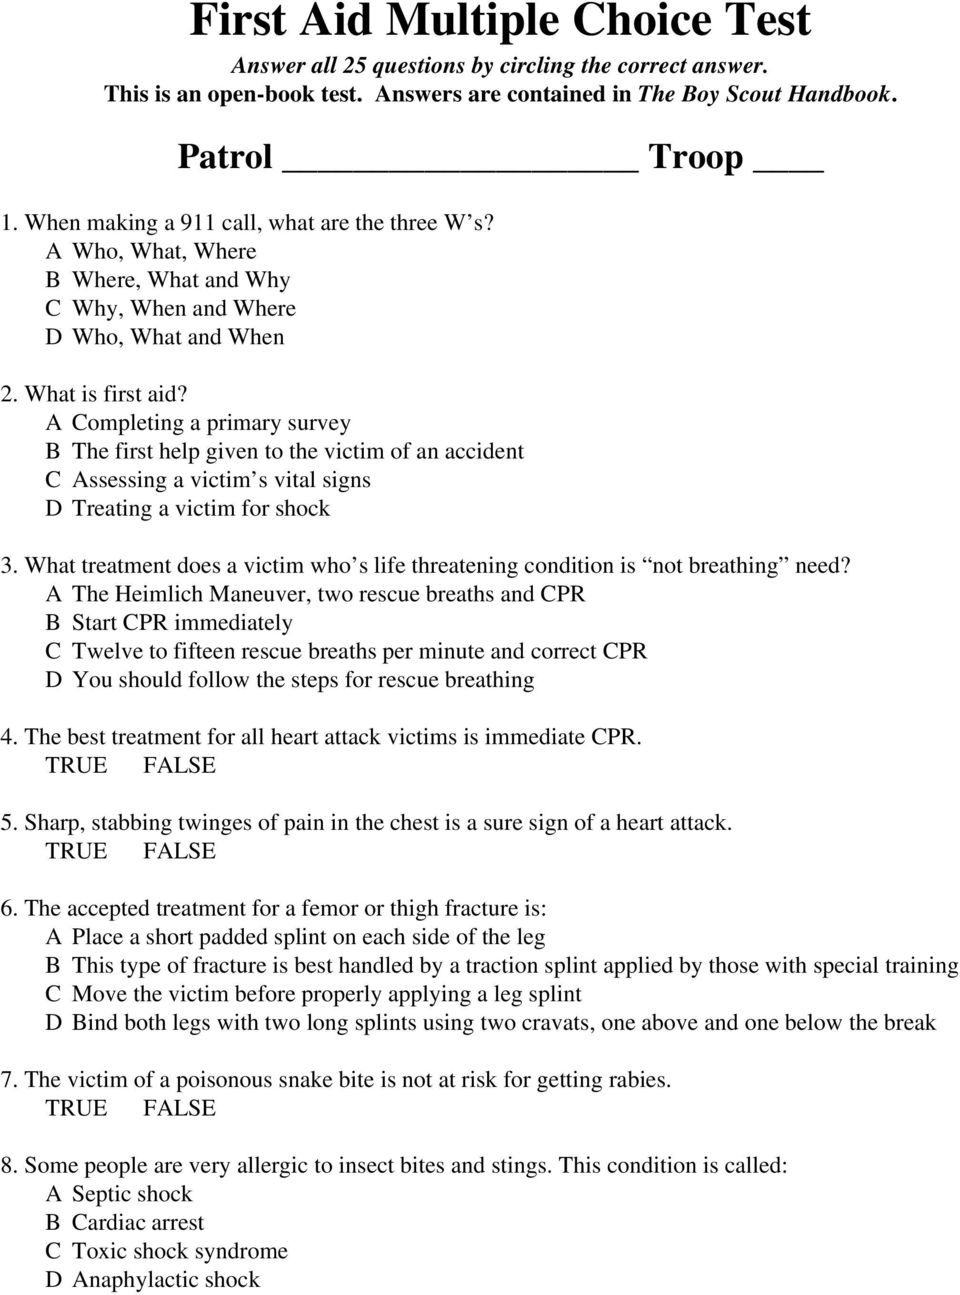 first aid test questions and answers 2020 pdf free download